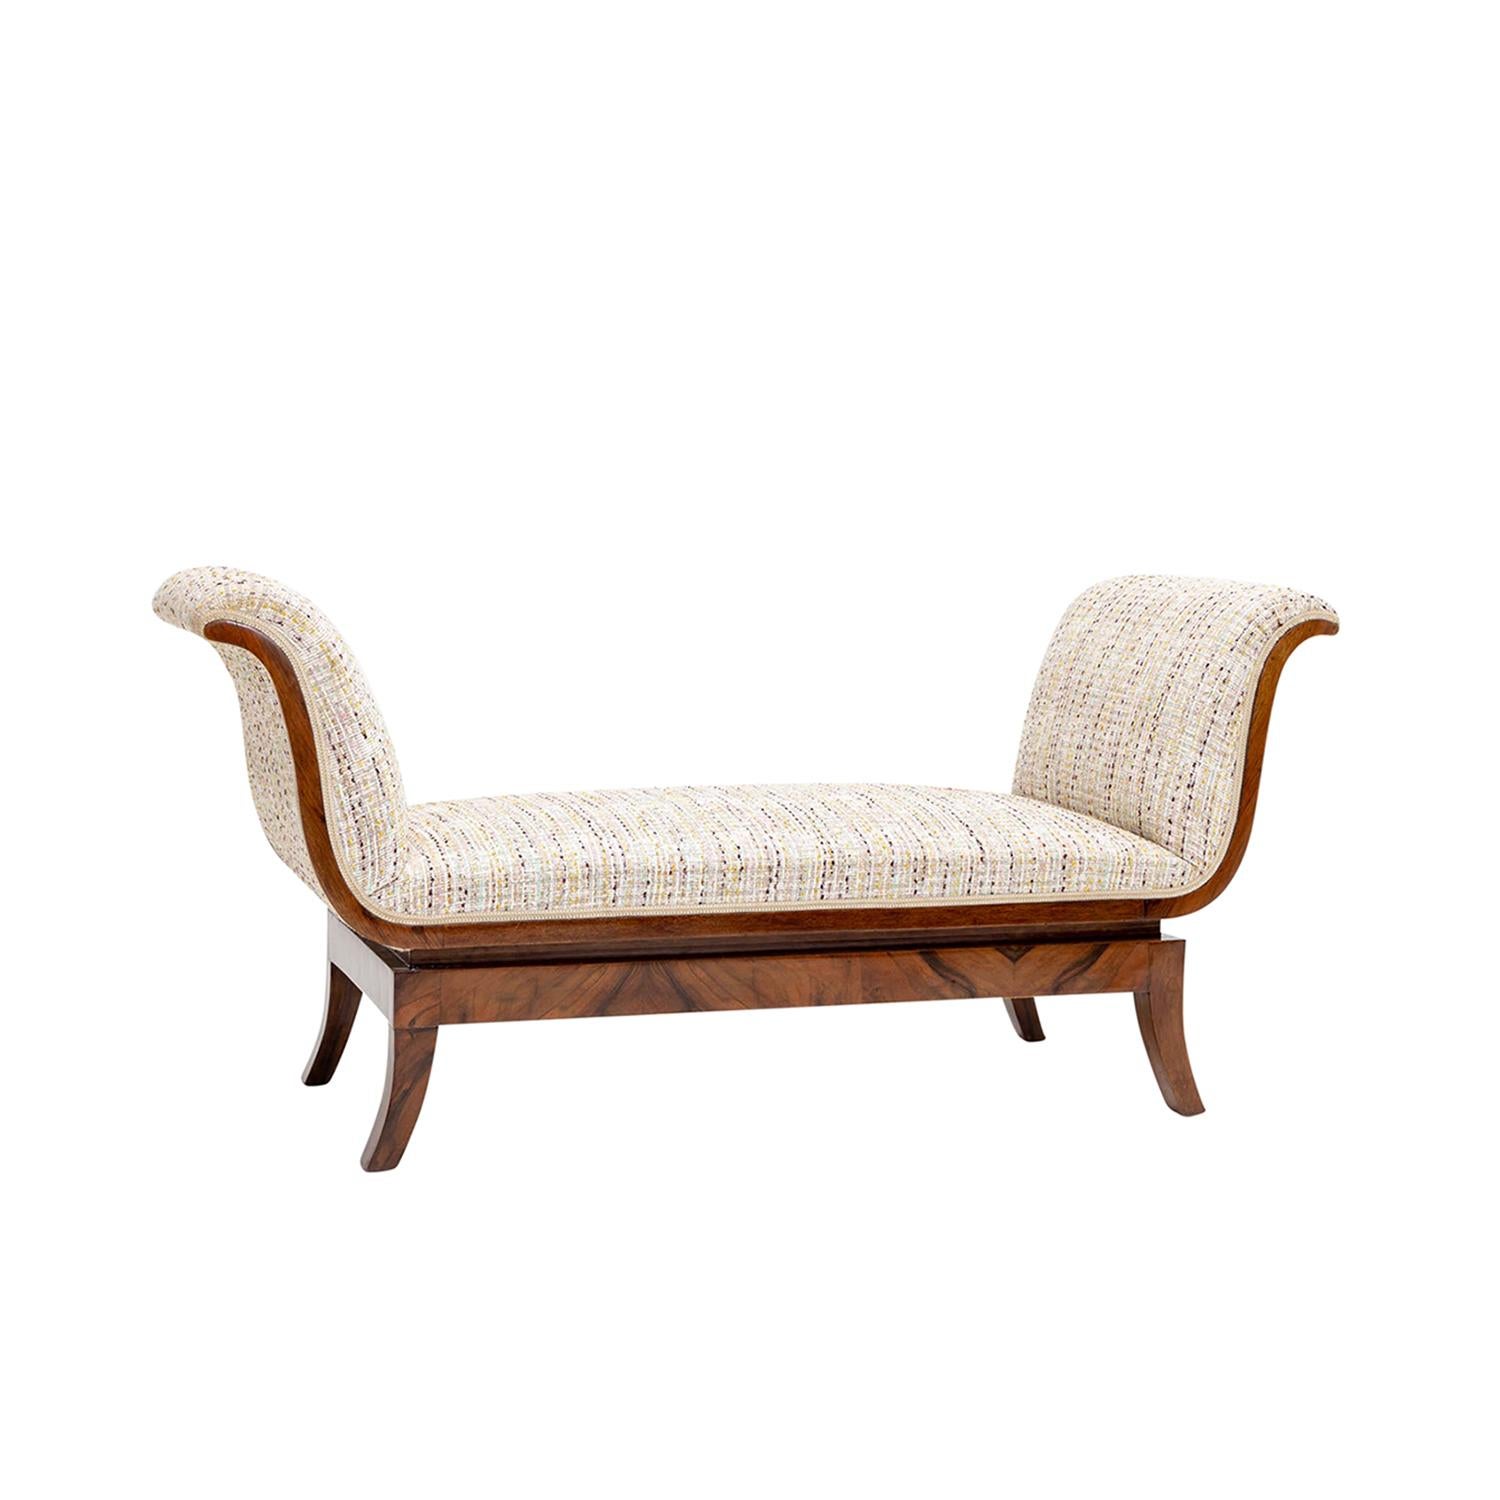 A small, vintage Art Deco Italian sofa bench made of hand crafted shellac polished, partly veneered Walnut in good condition. The canapé is particularized by two side backrests, standing on four arched wooden feet. Newly upholstered in an oat milk